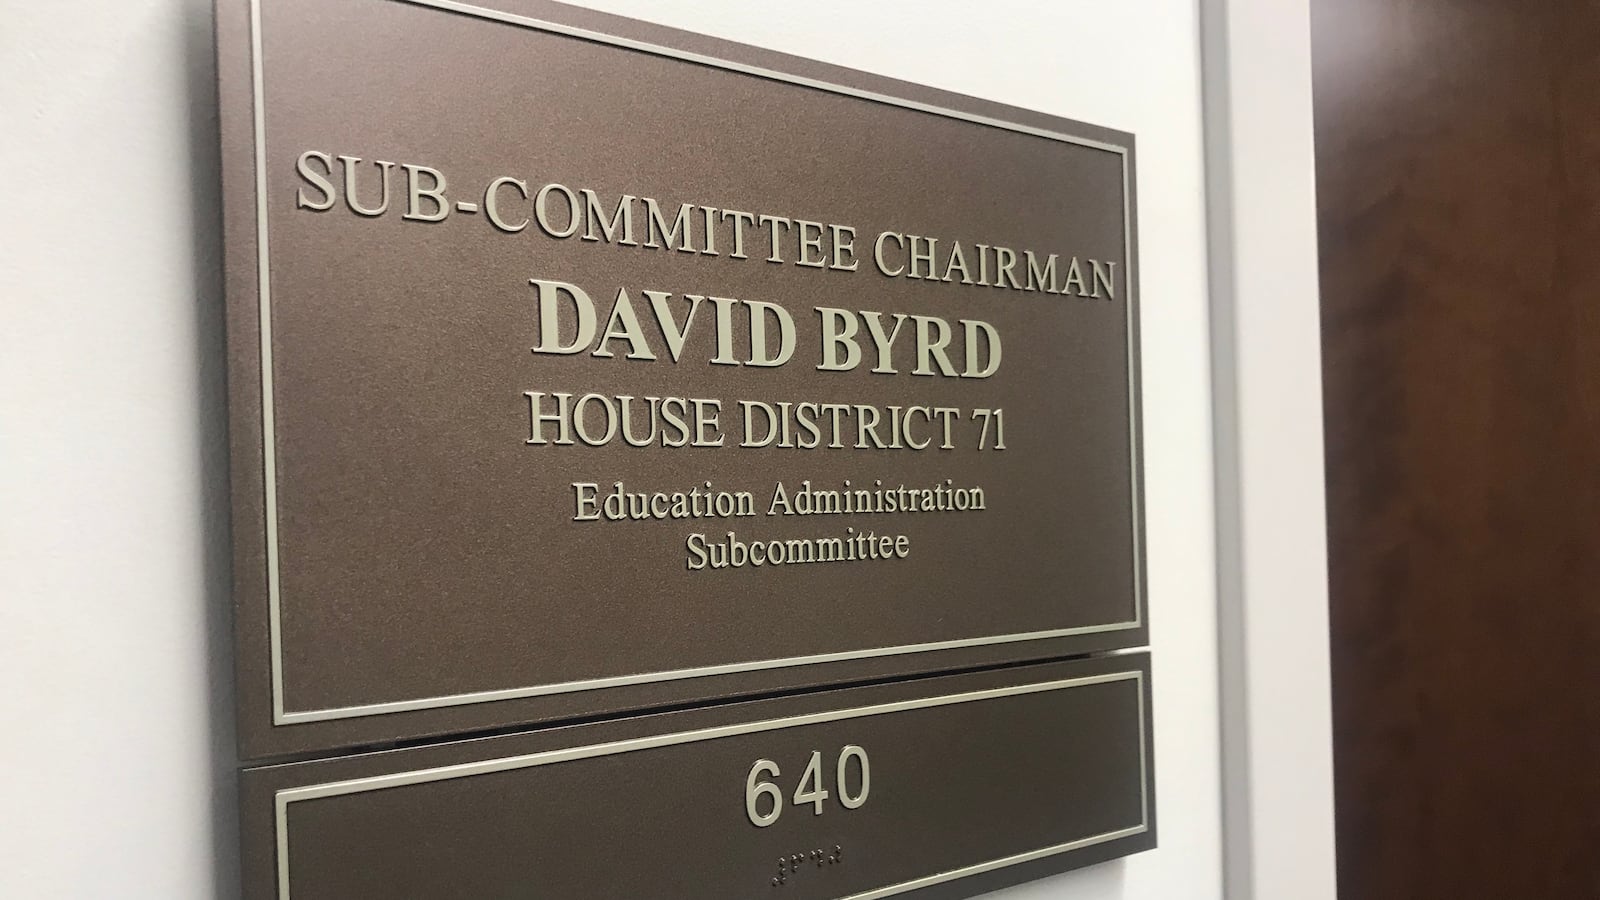 The sign outside of Rep. David Byrd's Nashville office identifies the Waynesboro Republican as chairman of the Education Administration Subcommittee of the Tennessee House of Representatives.